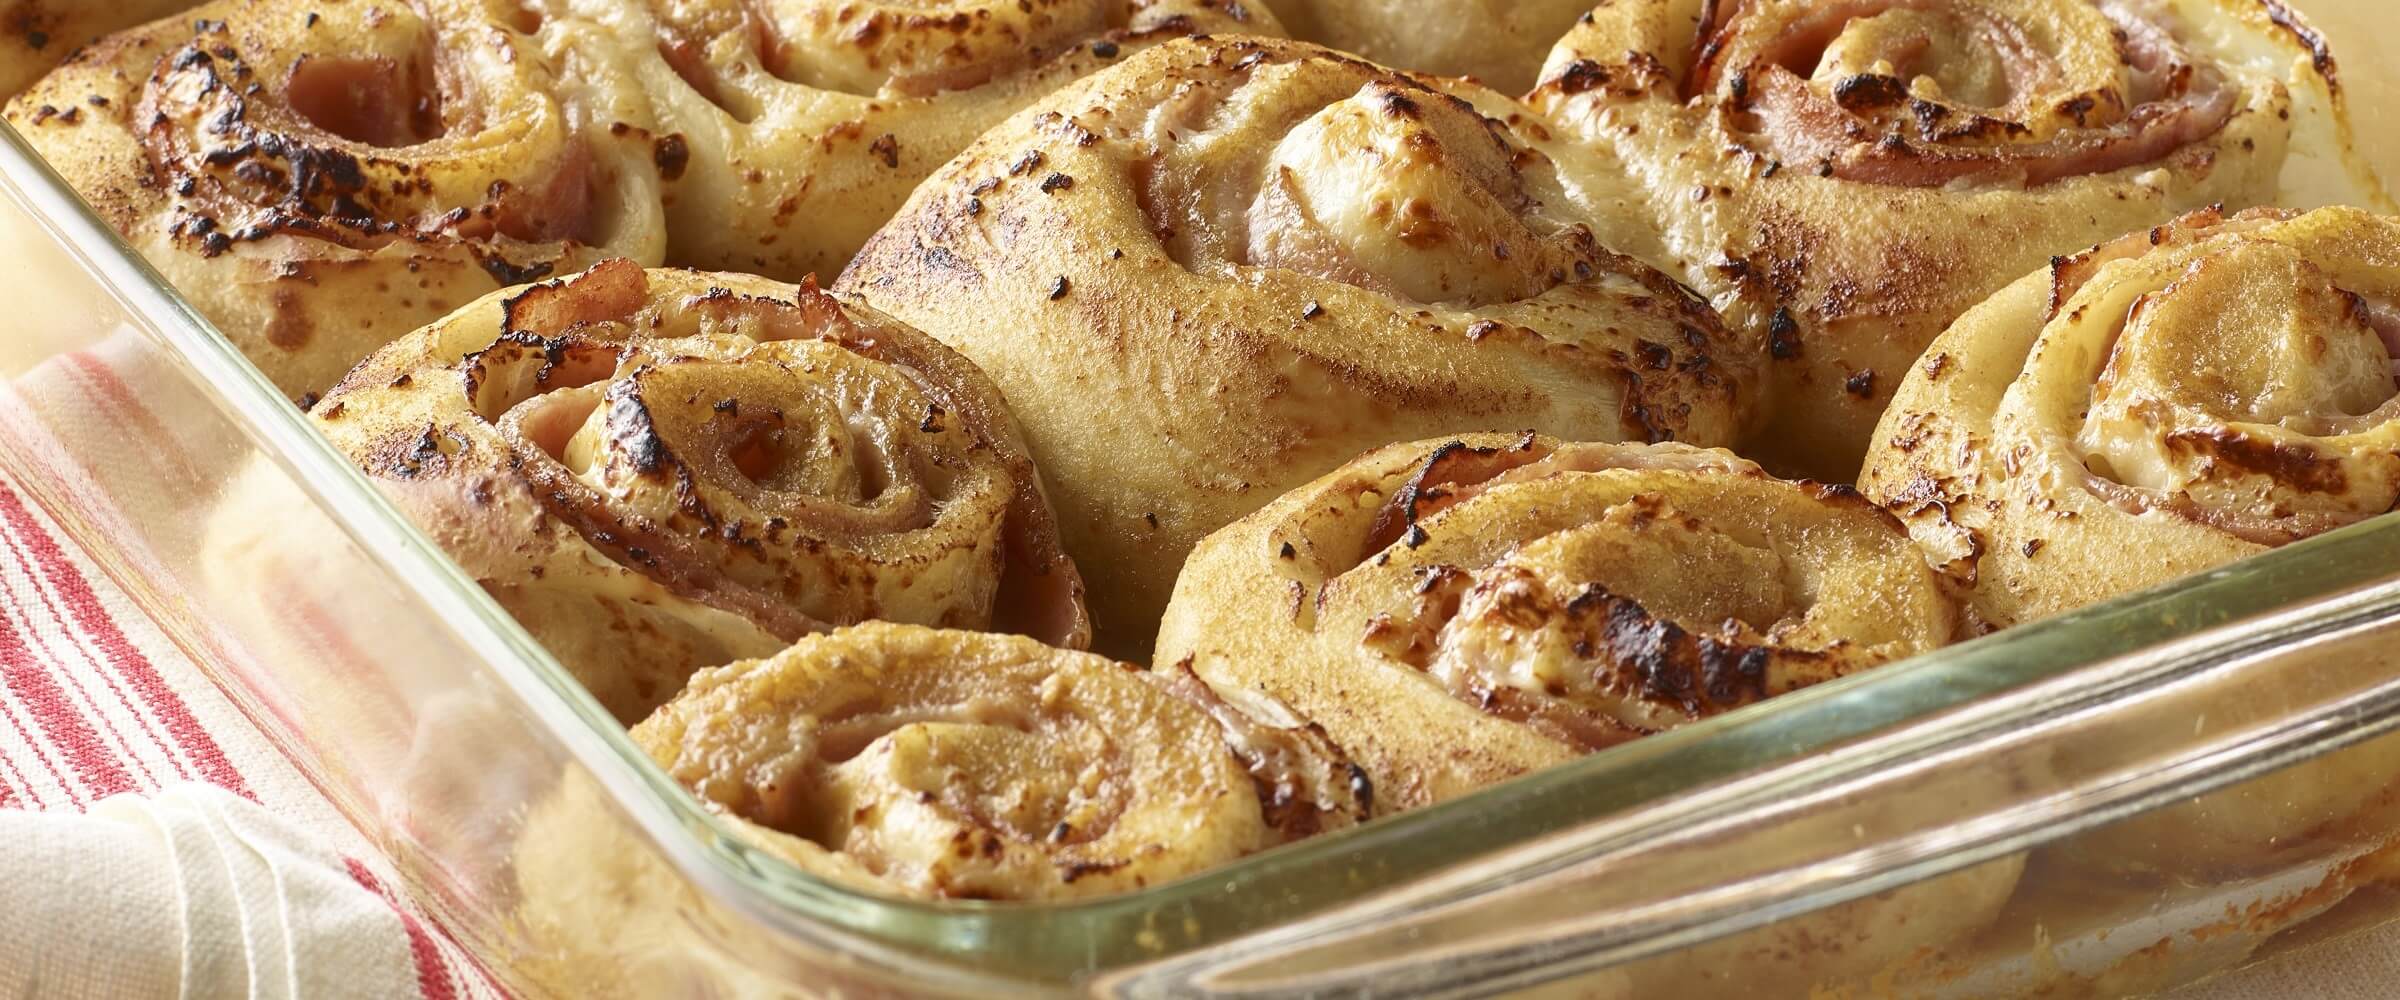 Savory ham and cheese rolls in clear baking dish